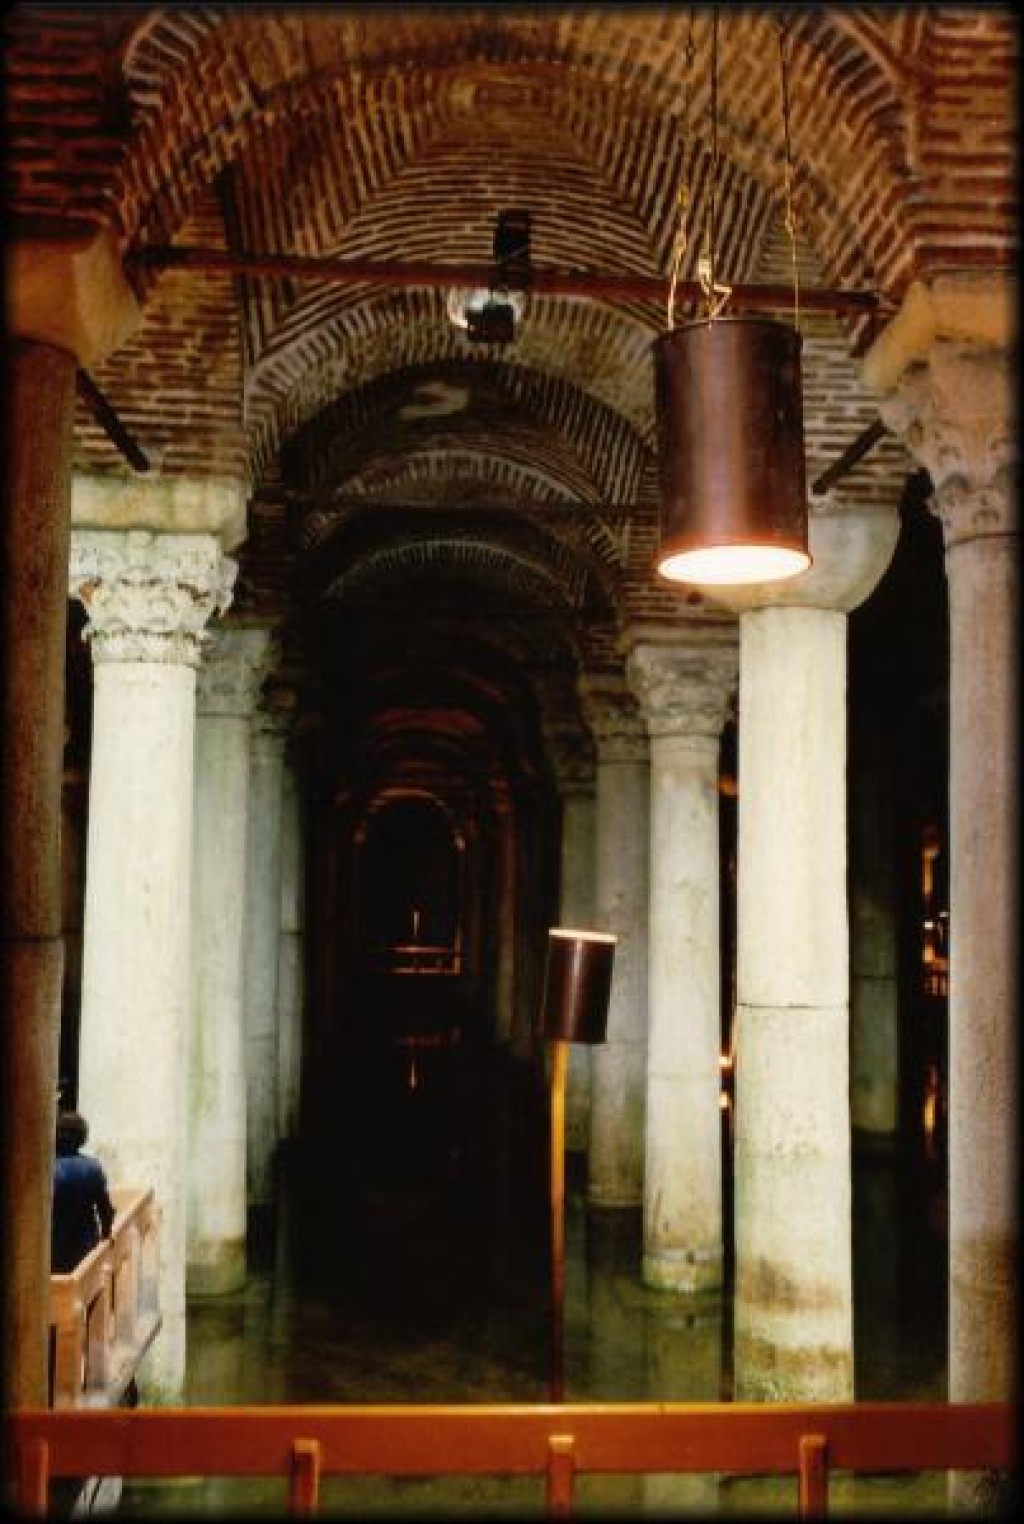 The underground cisterns were originally built in 532.  It was lost for a thousand year, when it was re-discovered and used to water the gardens of the Topkapi Palace.